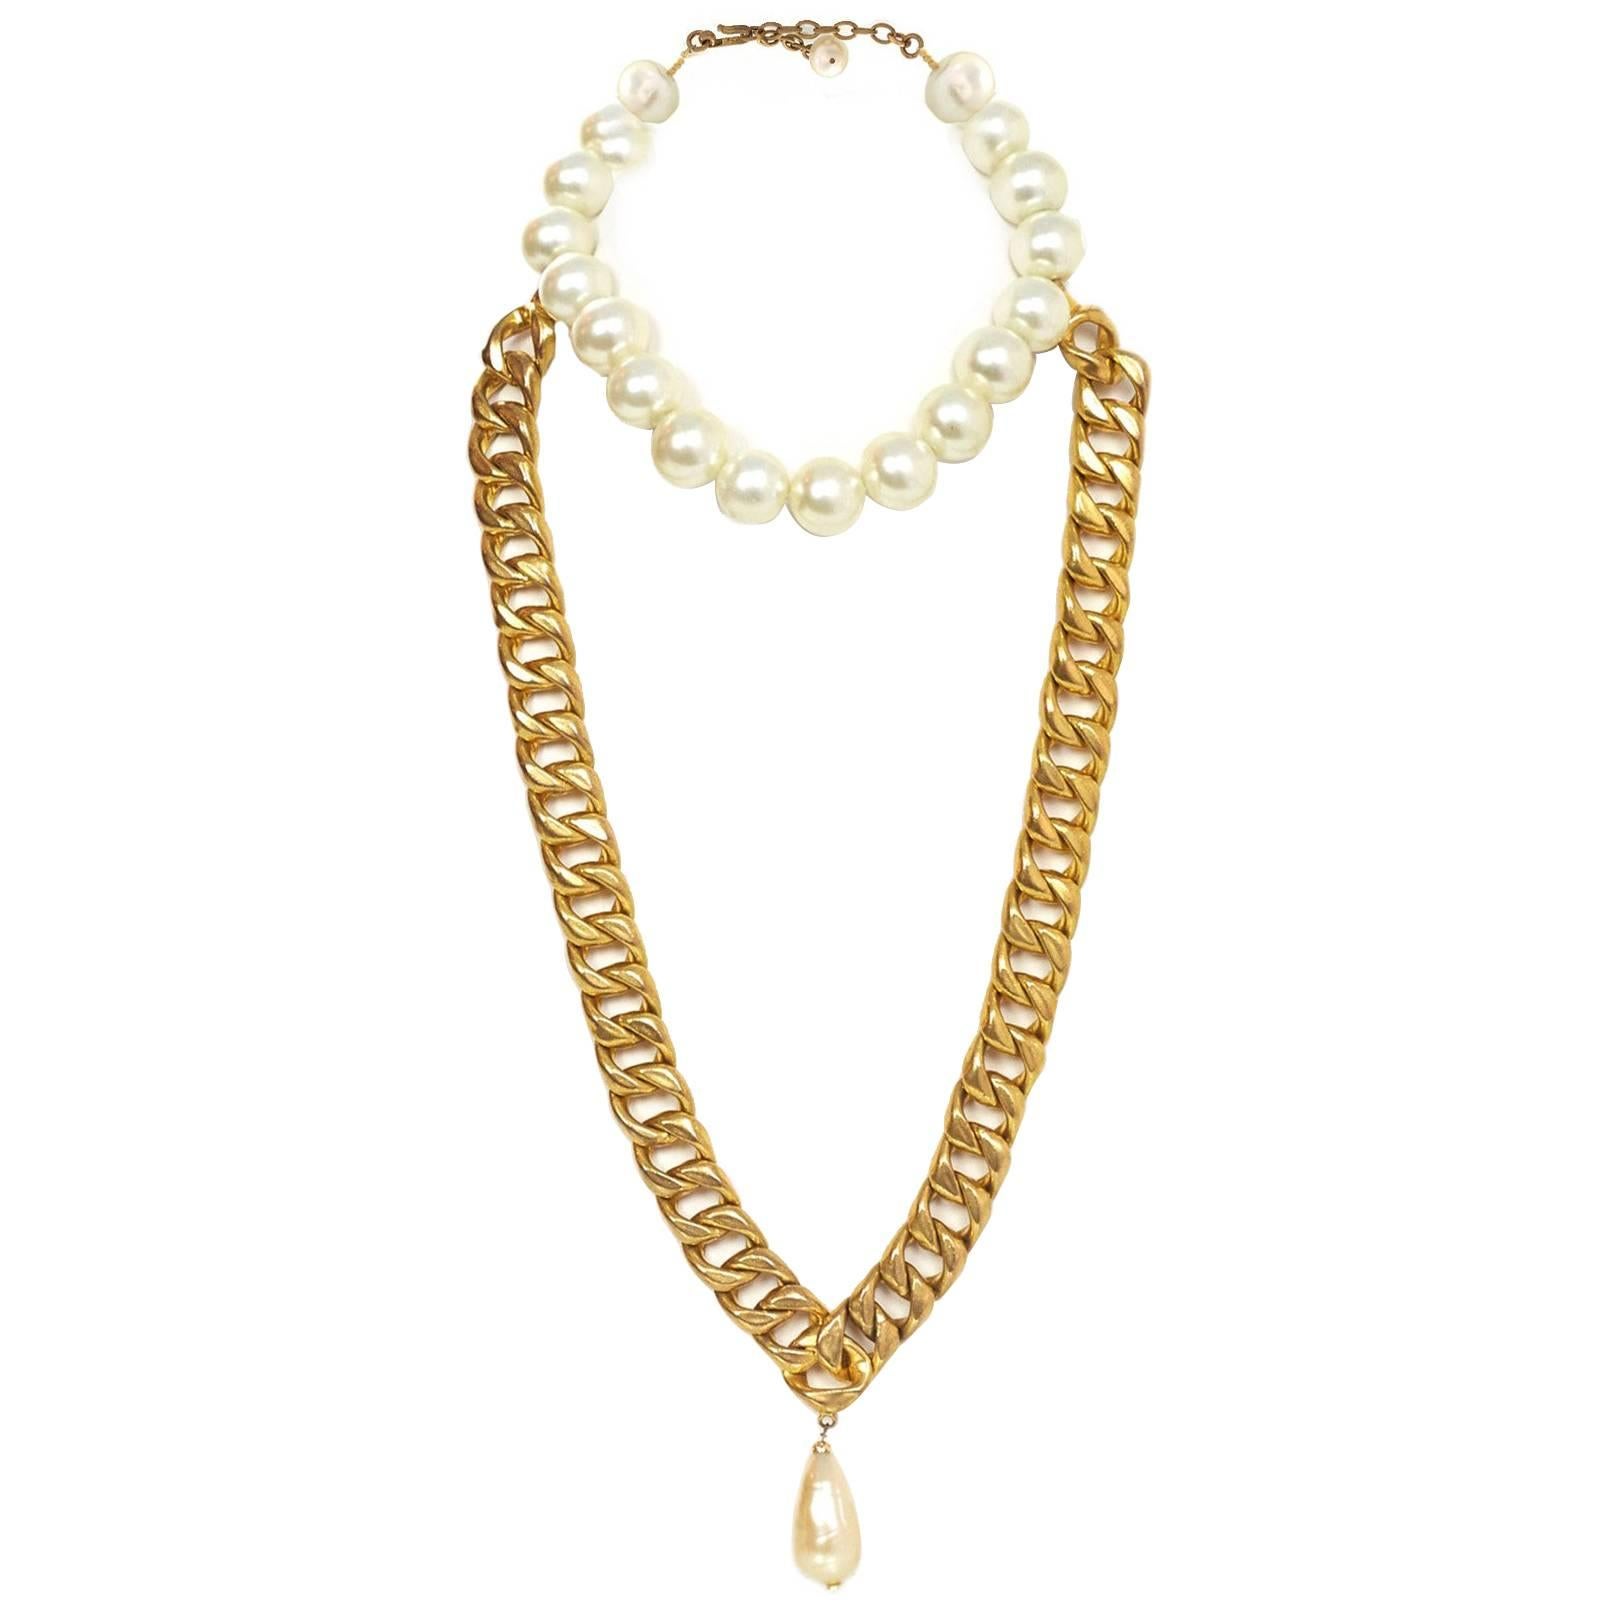 Chanel Large Pearl & Chain Link Necklace